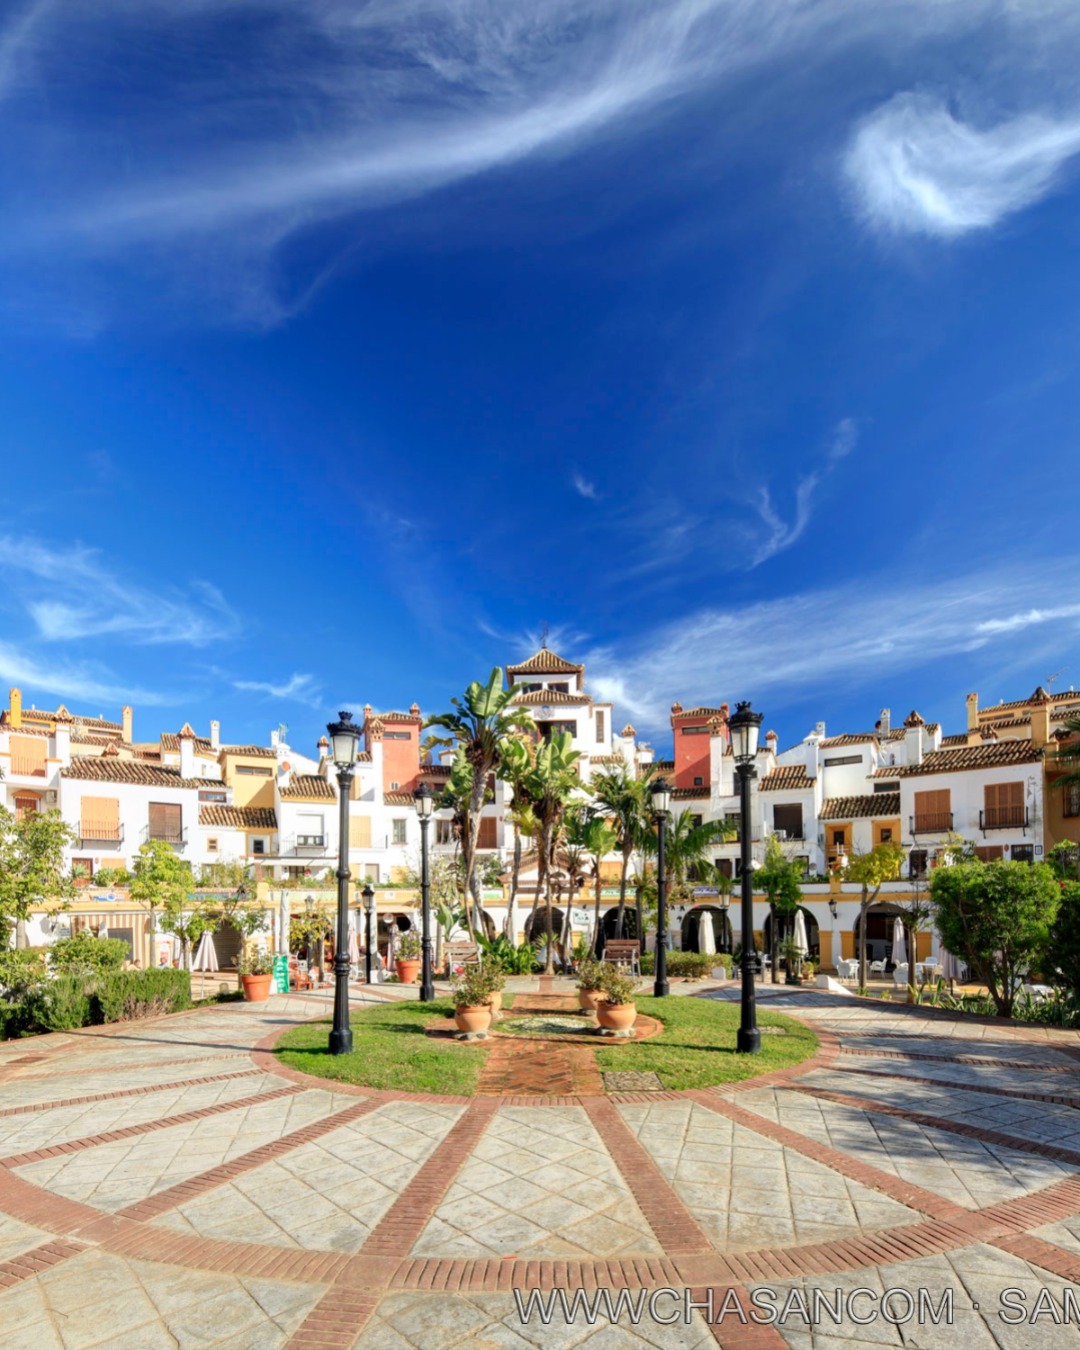 Alcaidesa: A Hidden Gem. Alcaidesa, a picturesque, gated community, is the undiscovered gem that many have been waiting for on the Costa Del Sol.